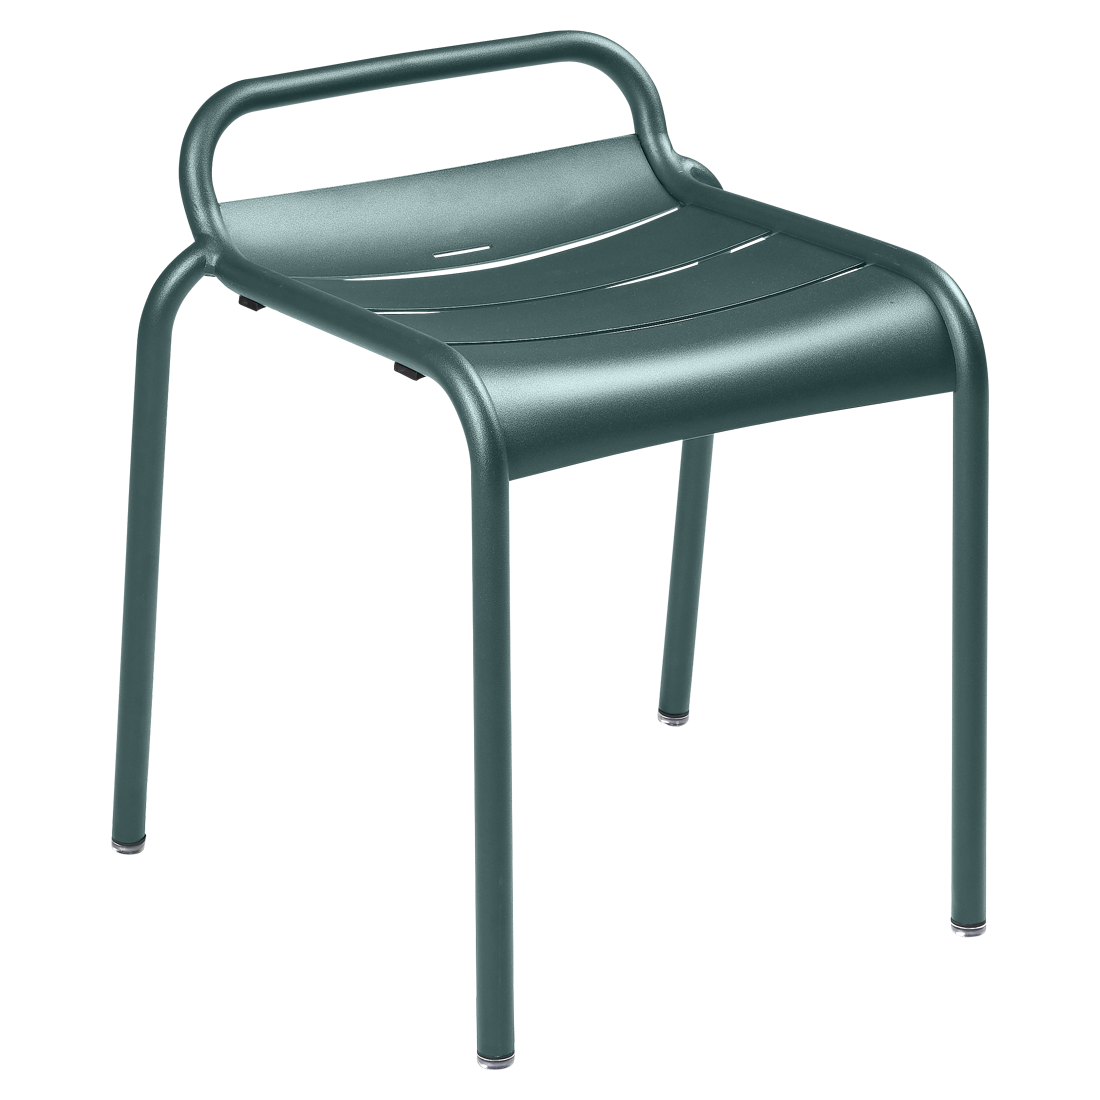 LUXEMBOURG / 4111 STACKING CHAIR